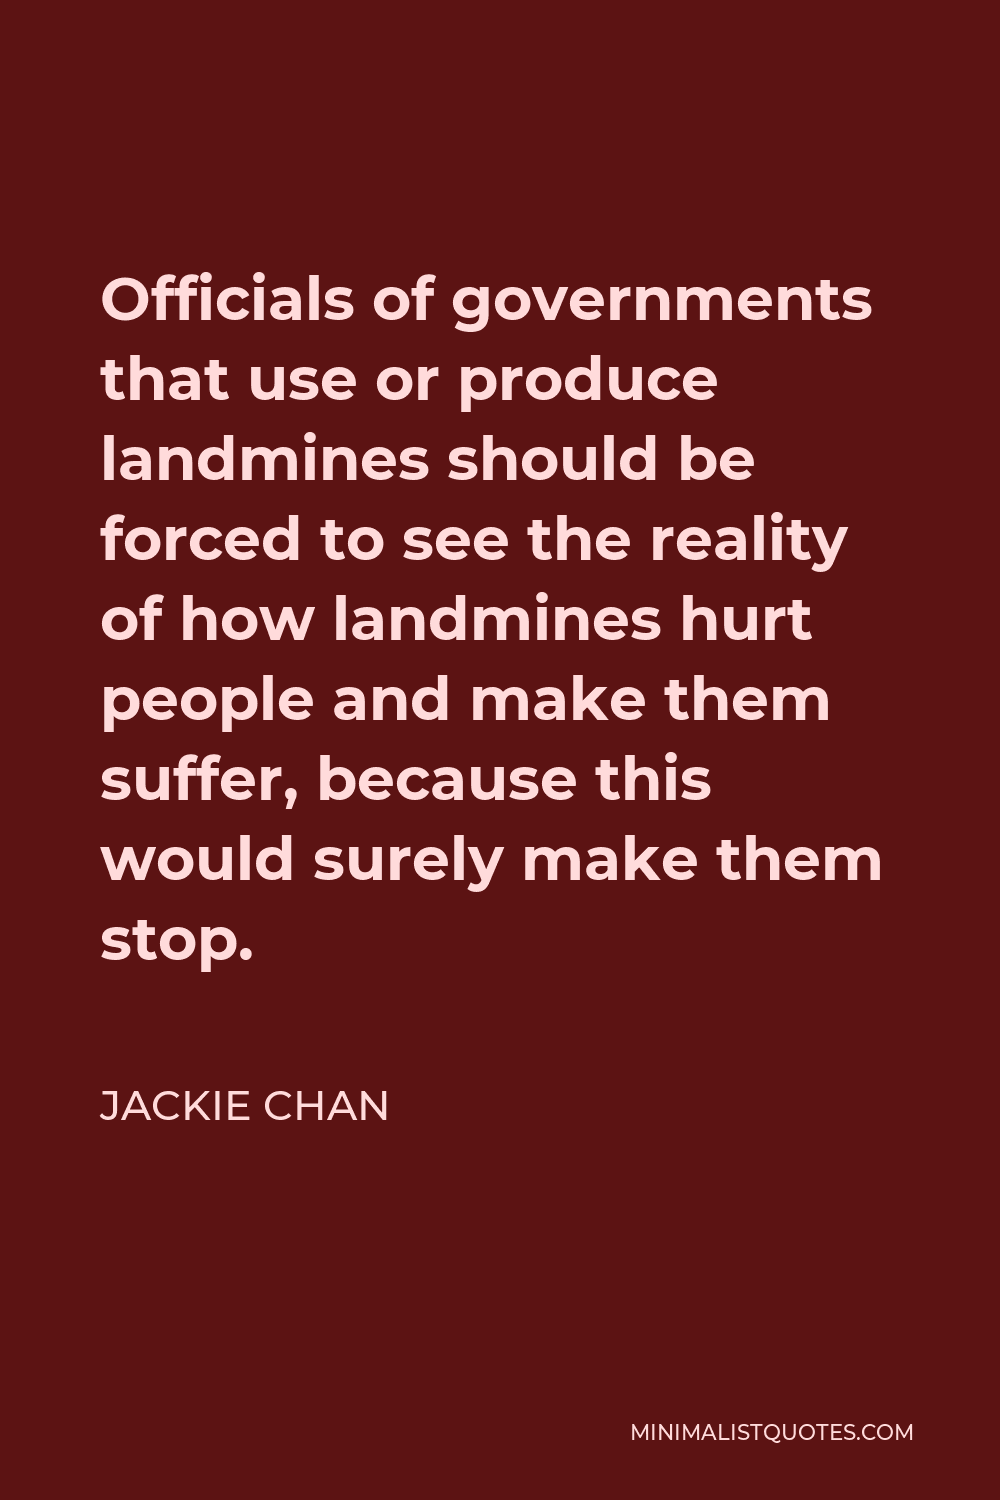 Jackie Chan Quote - Officials of governments that use or produce landmines should be forced to see the reality of how landmines hurt people and make them suffer, because this would surely make them stop.